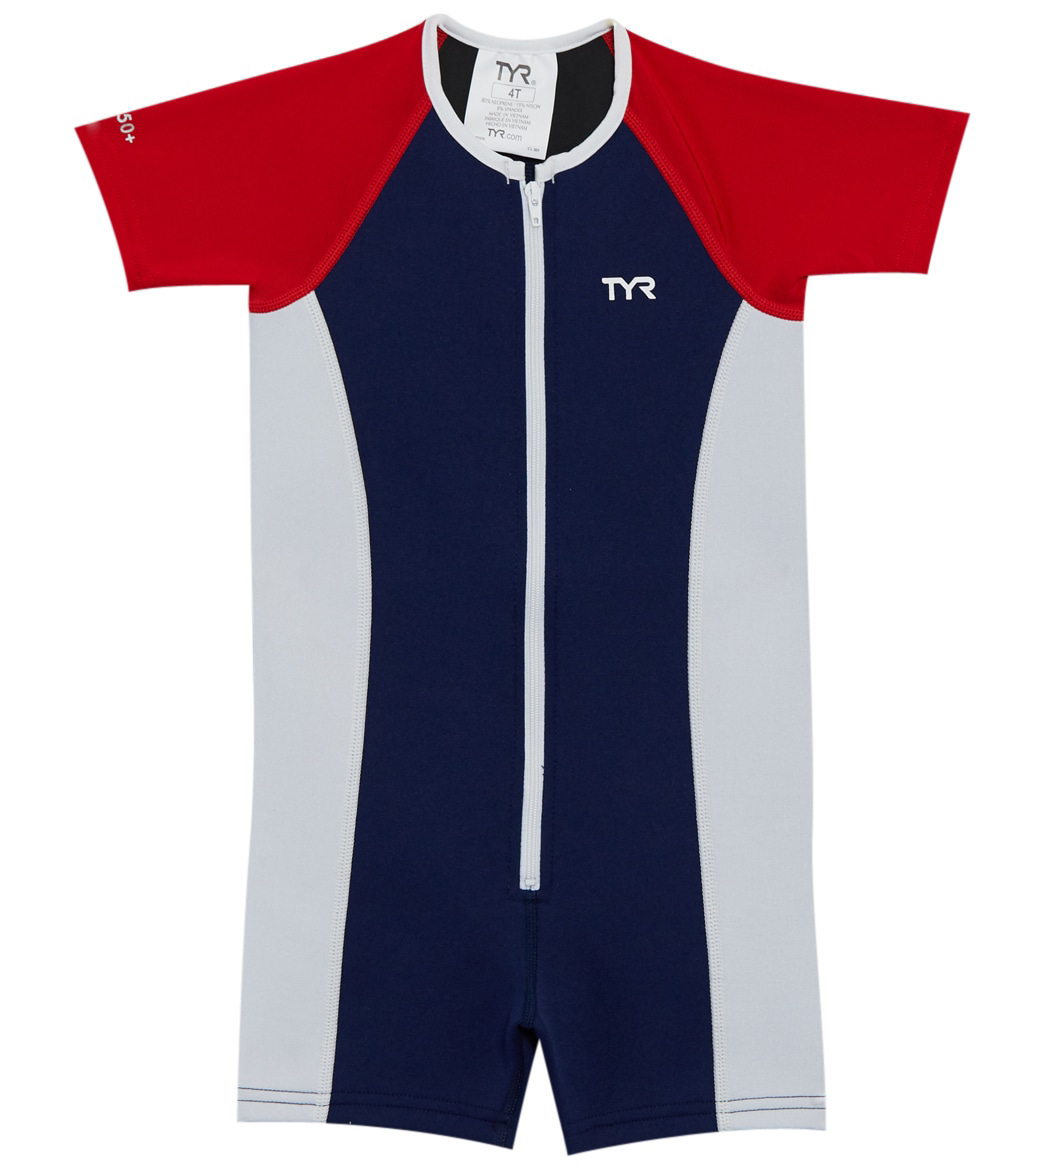 TYR Boys' Upf 50+ Short Sleeve Thermal Suit Toddler - Navy/Red/White 4T - Swimoutlet.com